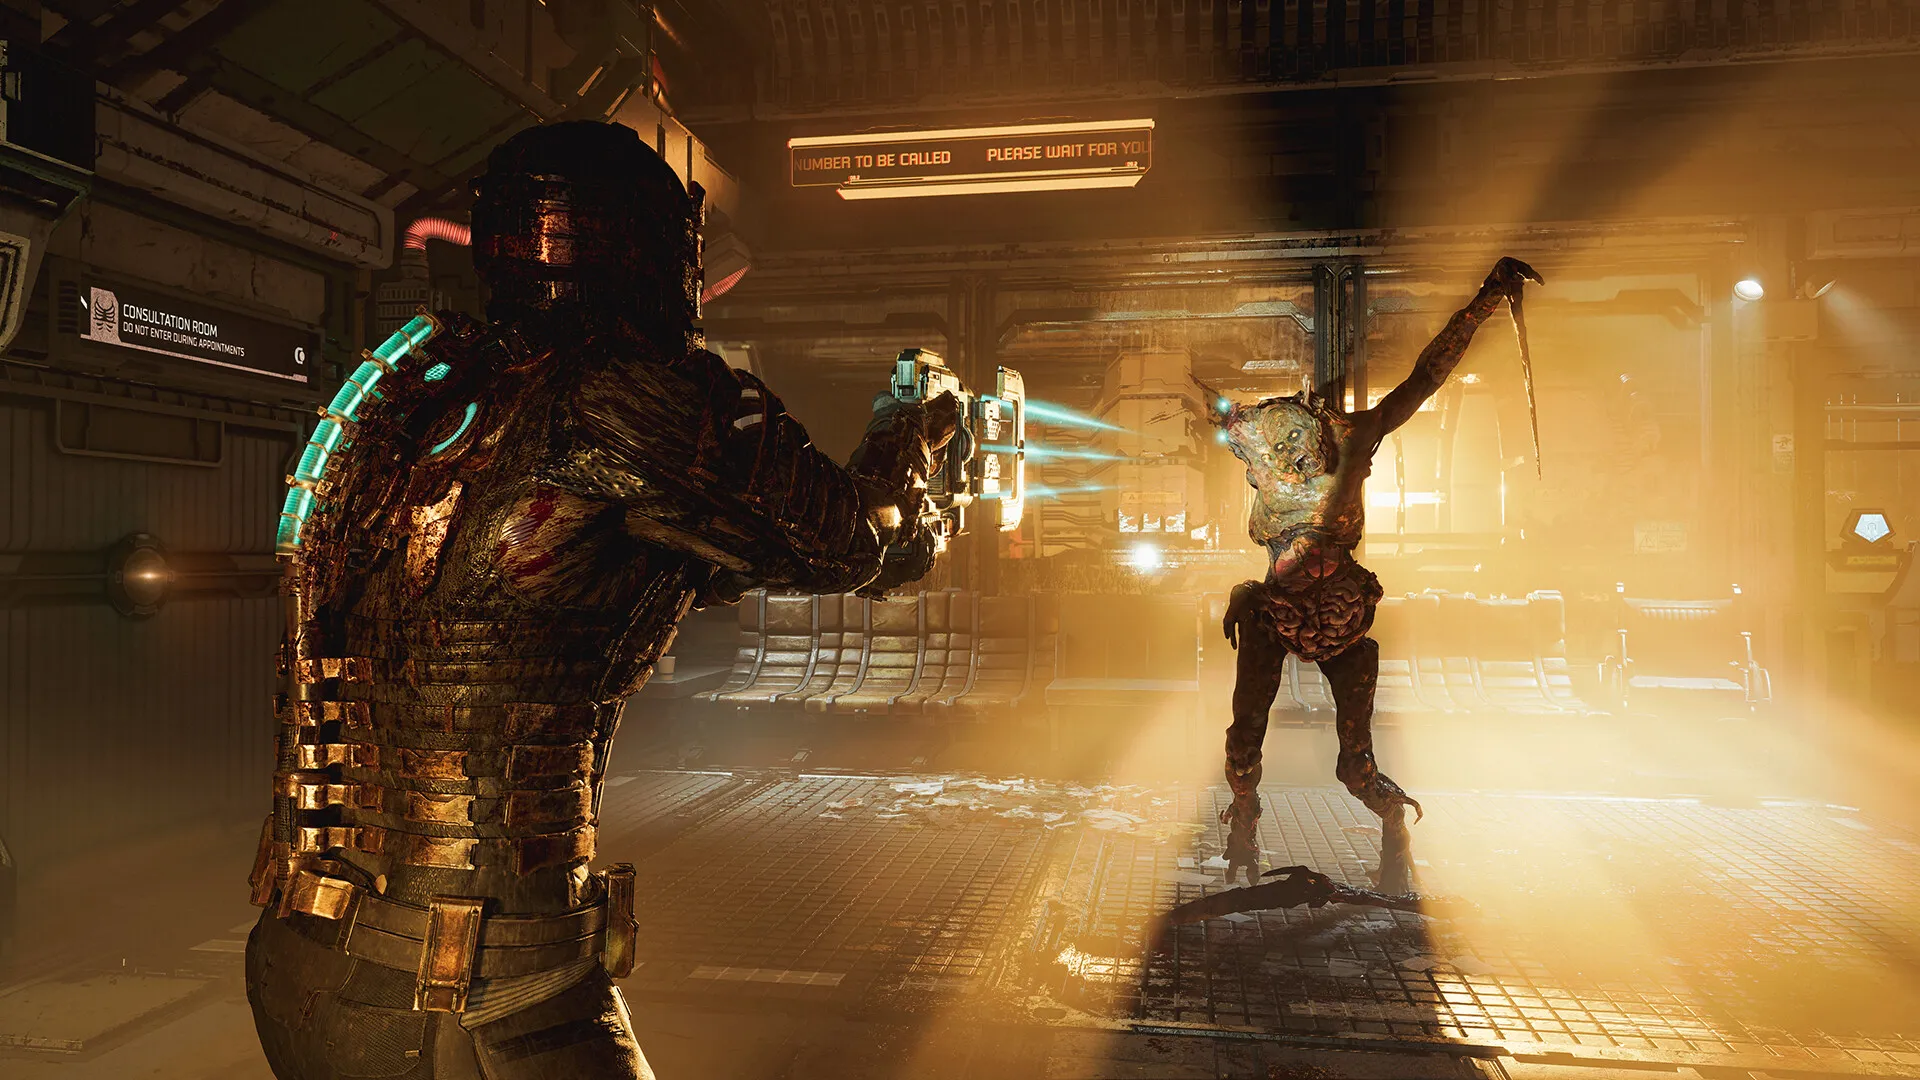 Dead Space Remake Headlines New October Game Pass Titles